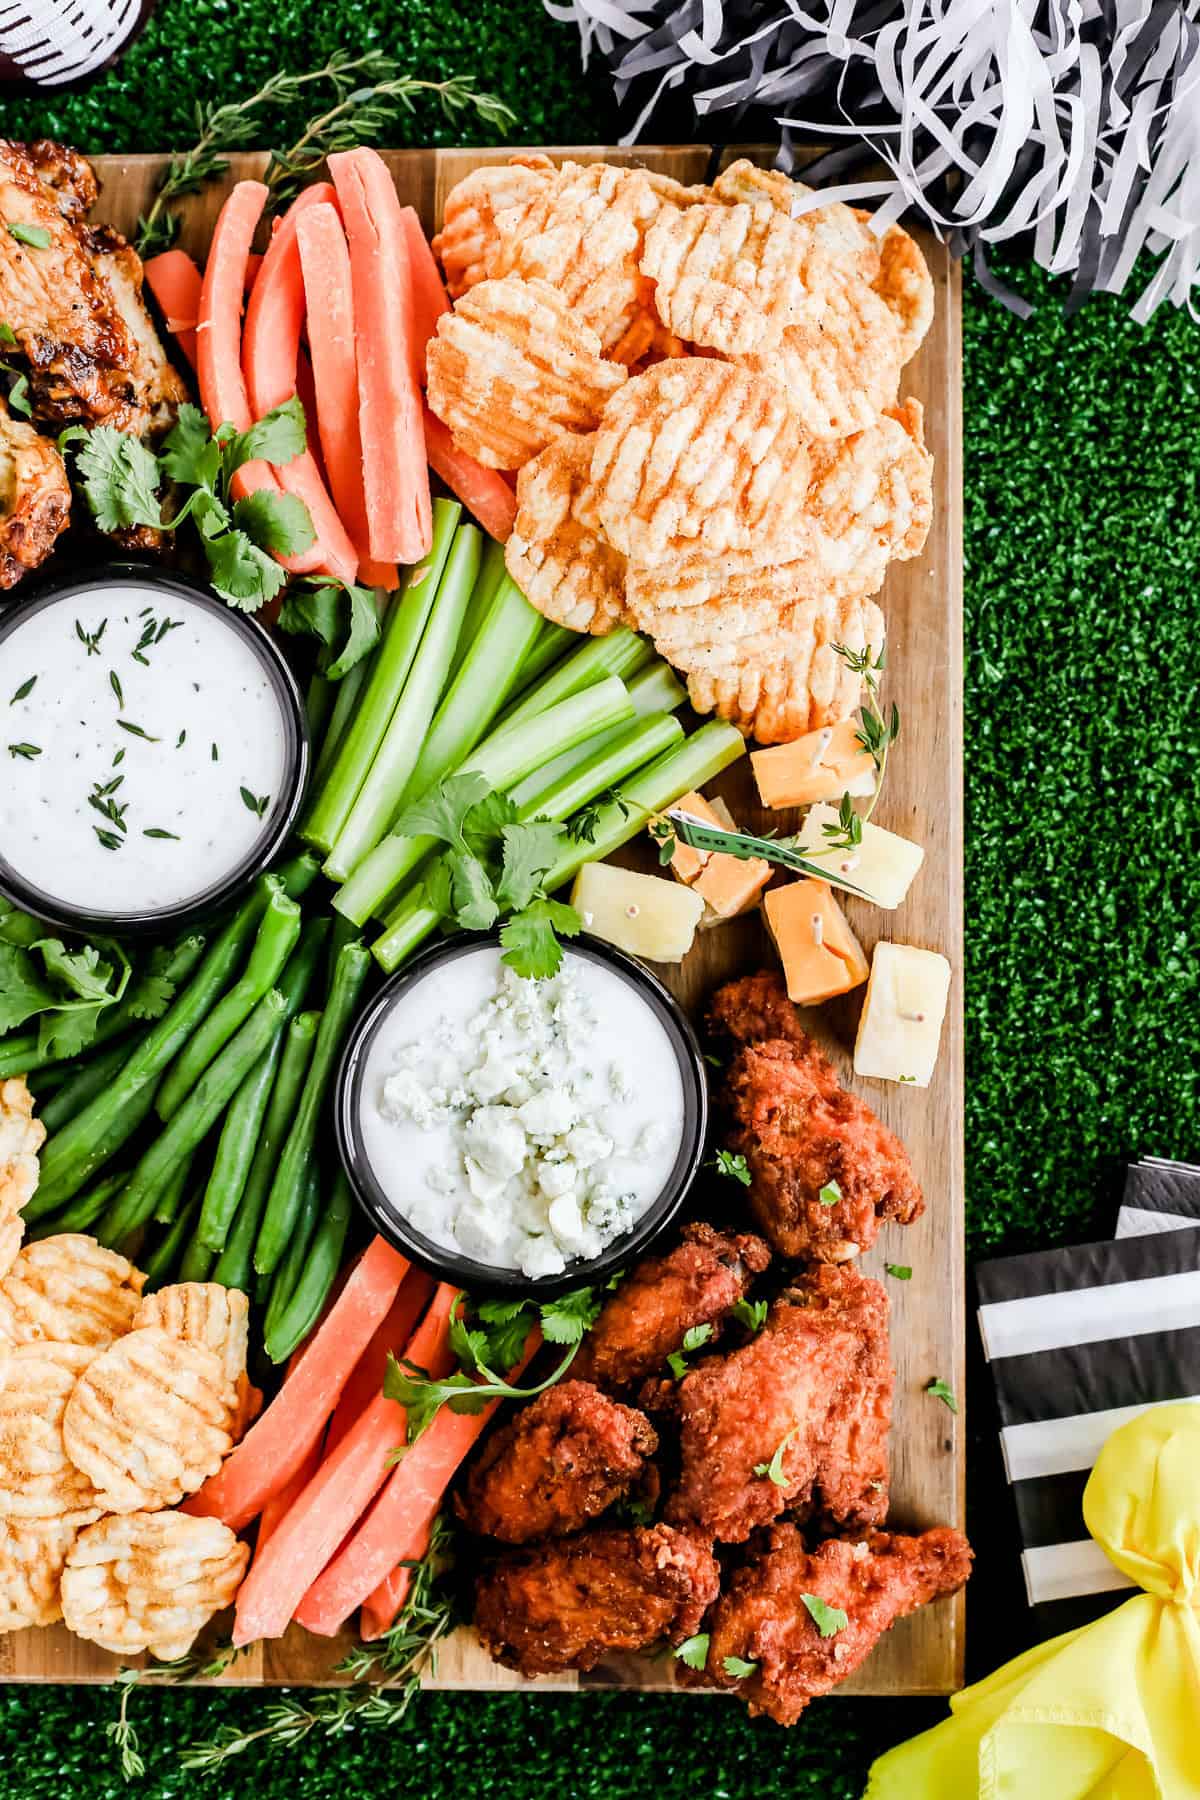 chicken wings, vegetable sticks, white dips, and cheese cubes on wood board surrounded by football themed decorations.